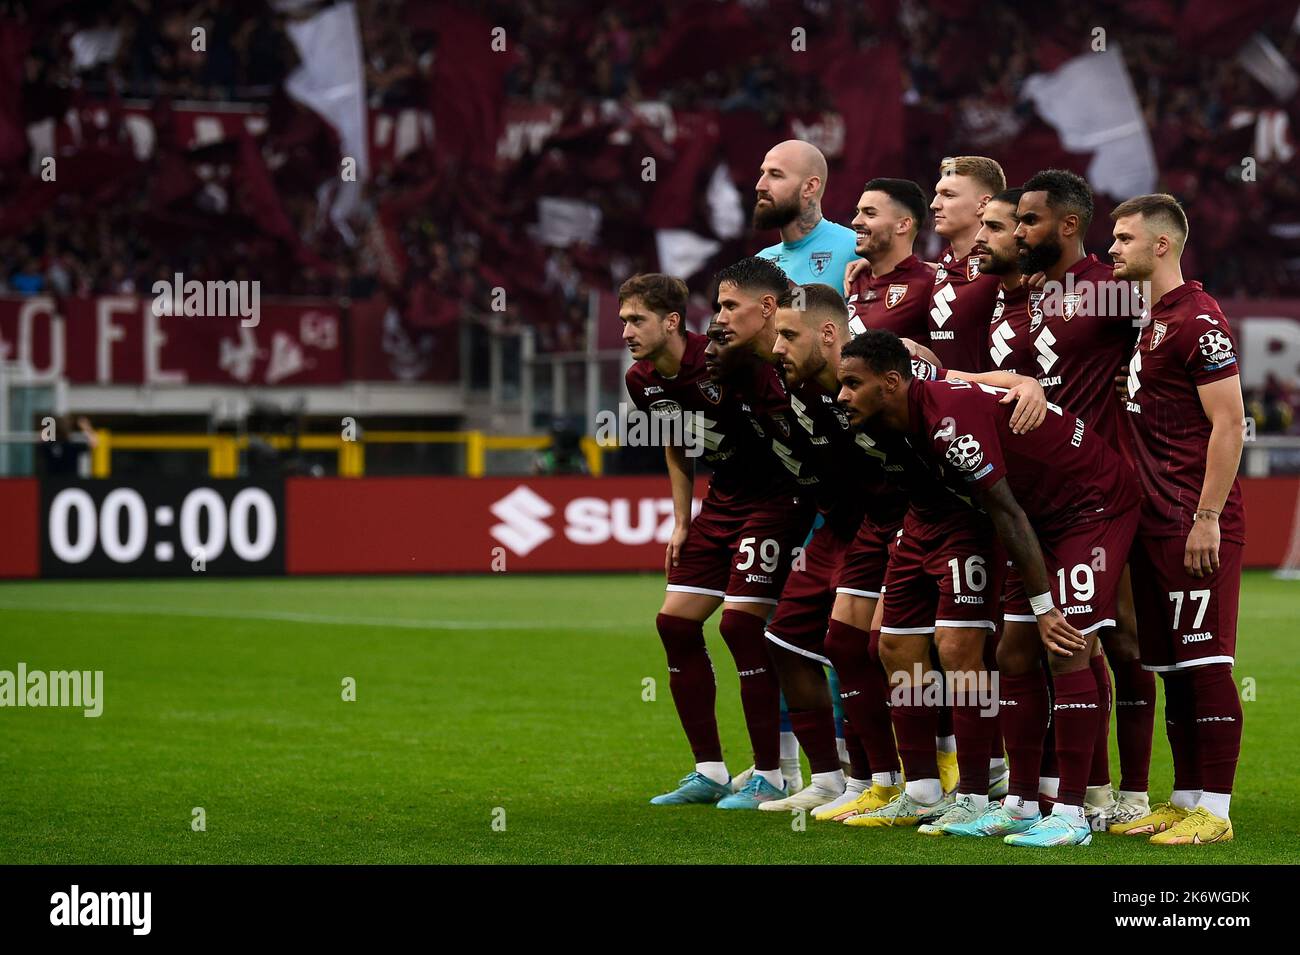 Turin, Italy. 20 May 2022. Players of Torino FC pose for a team photo prior  to the Serie A football match between Torino FC and AS Roma. Credit: Nicolò  Campo/Alamy Live News